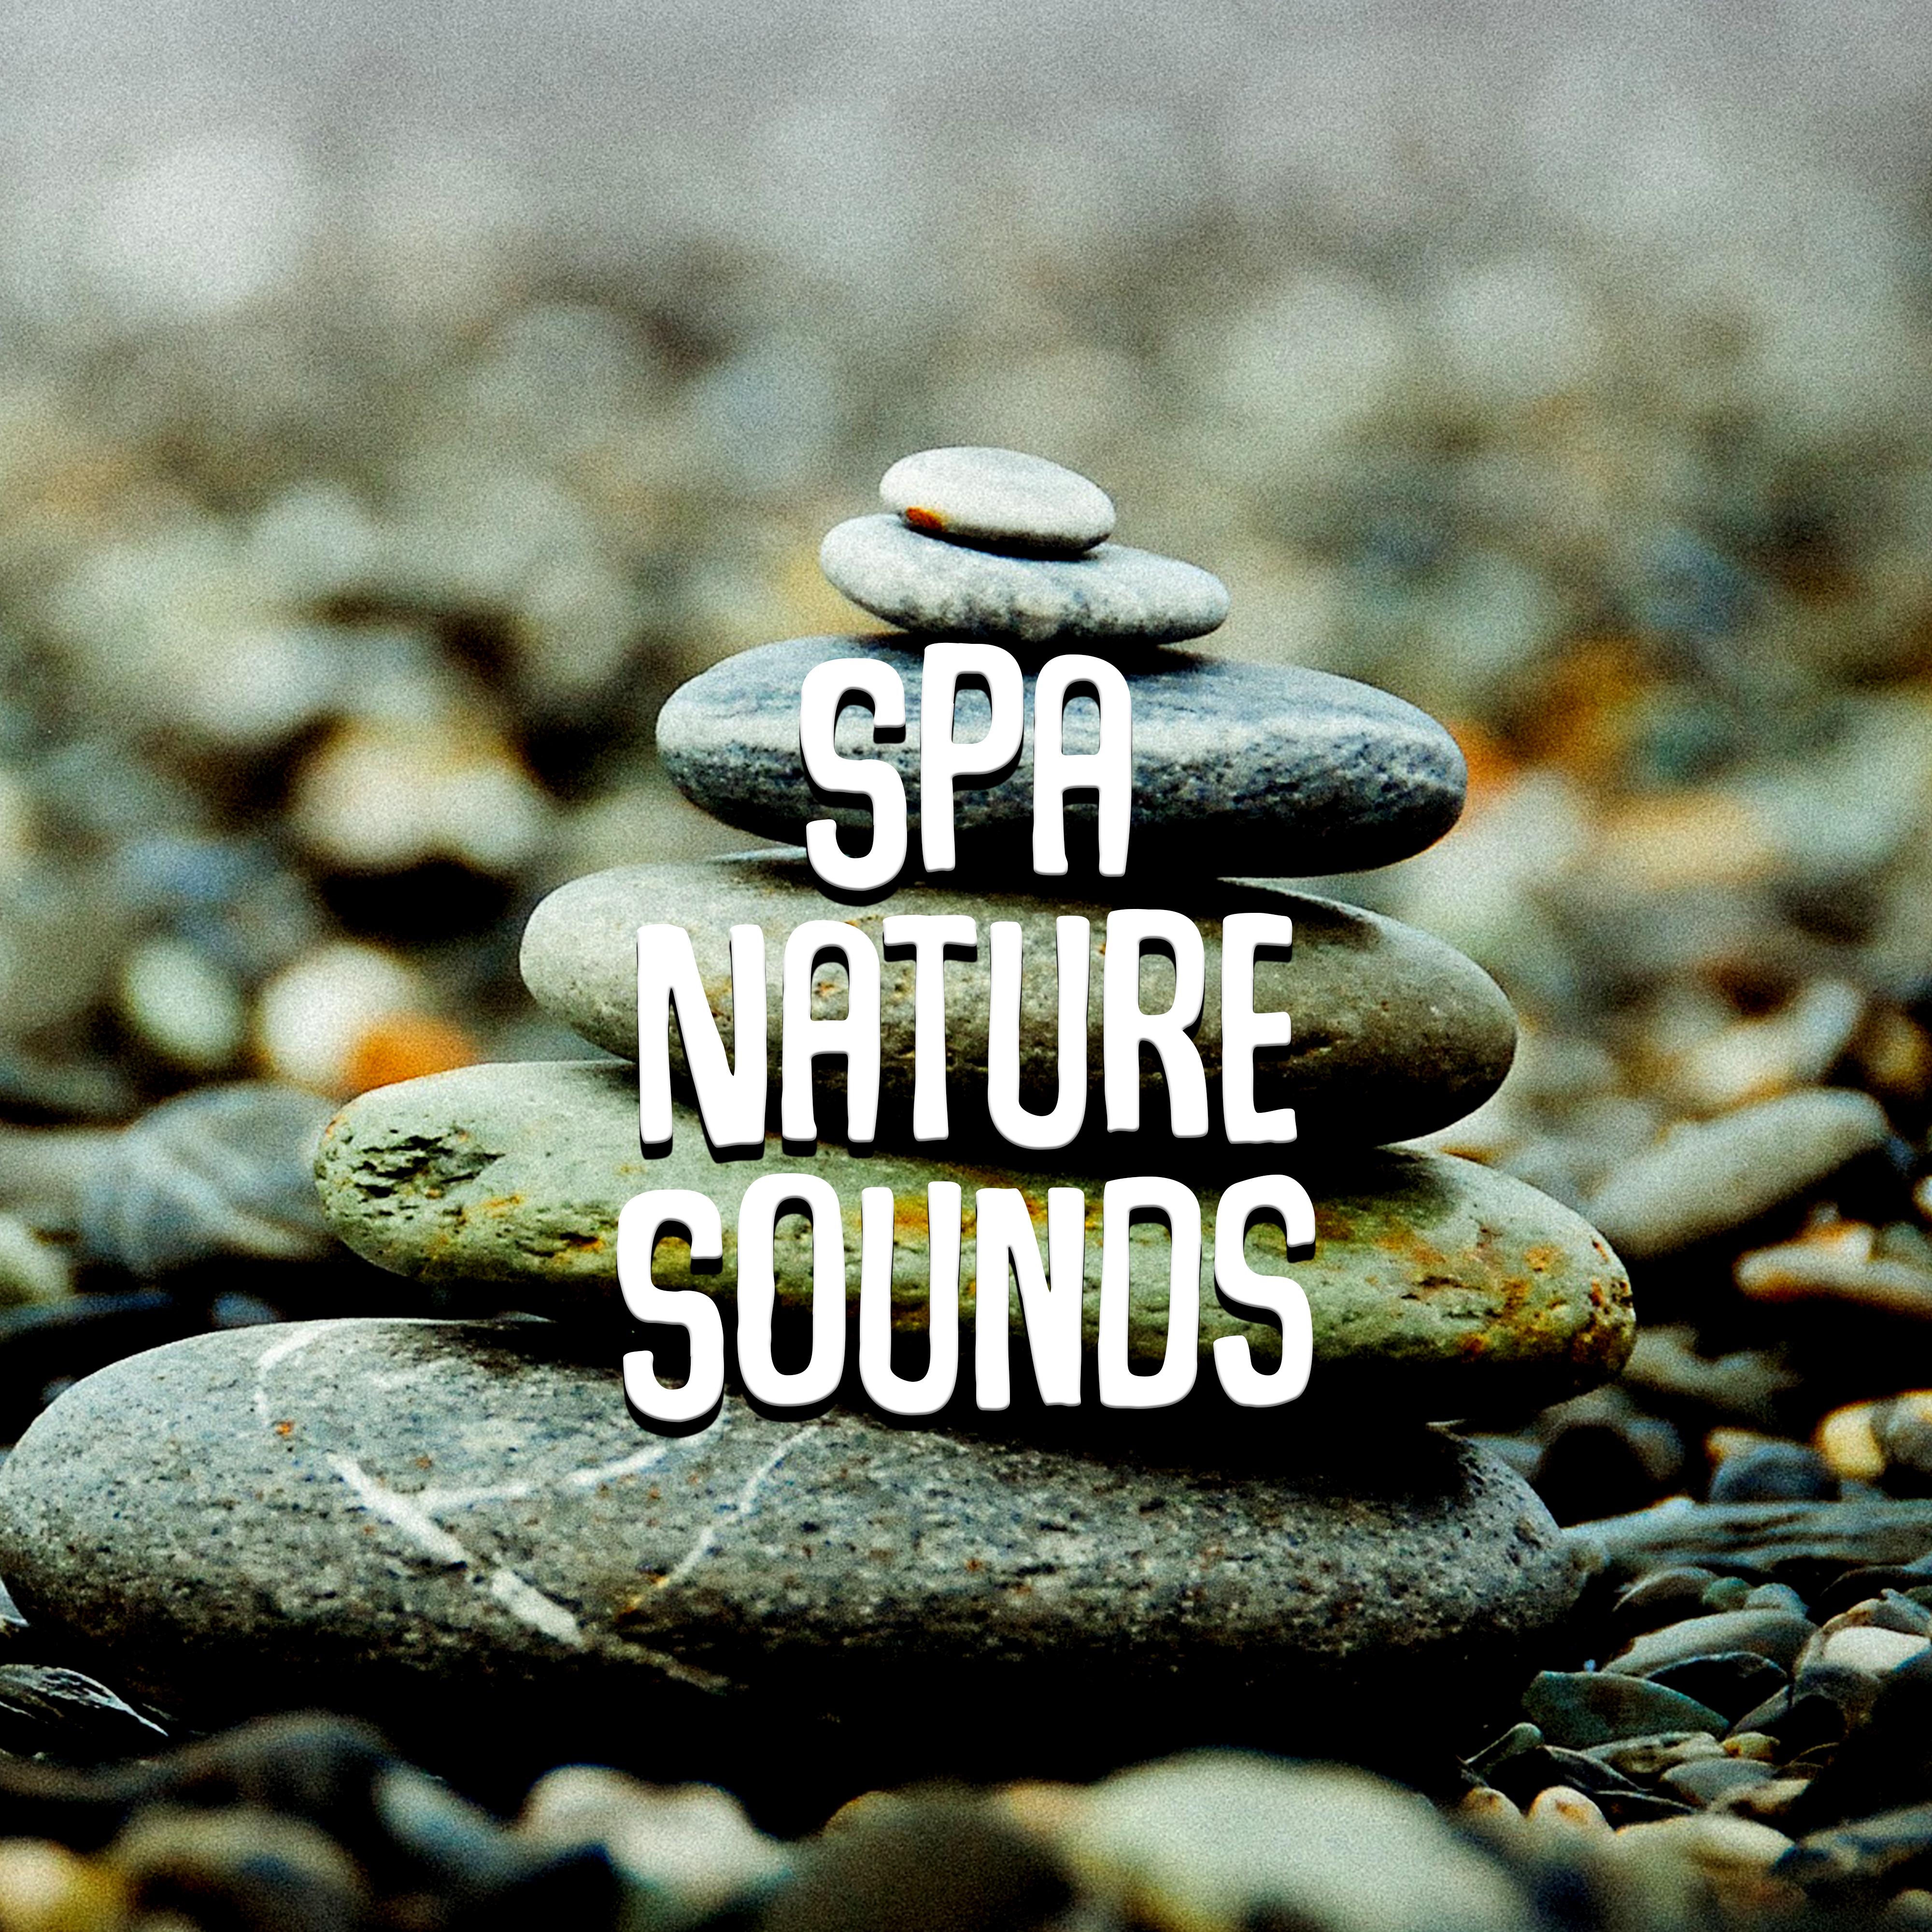 Spa Nature Sounds  Relaxation Sounds for Wellness, Spa, Calm Nature Sounds, Calming Water, Peaceful Waves